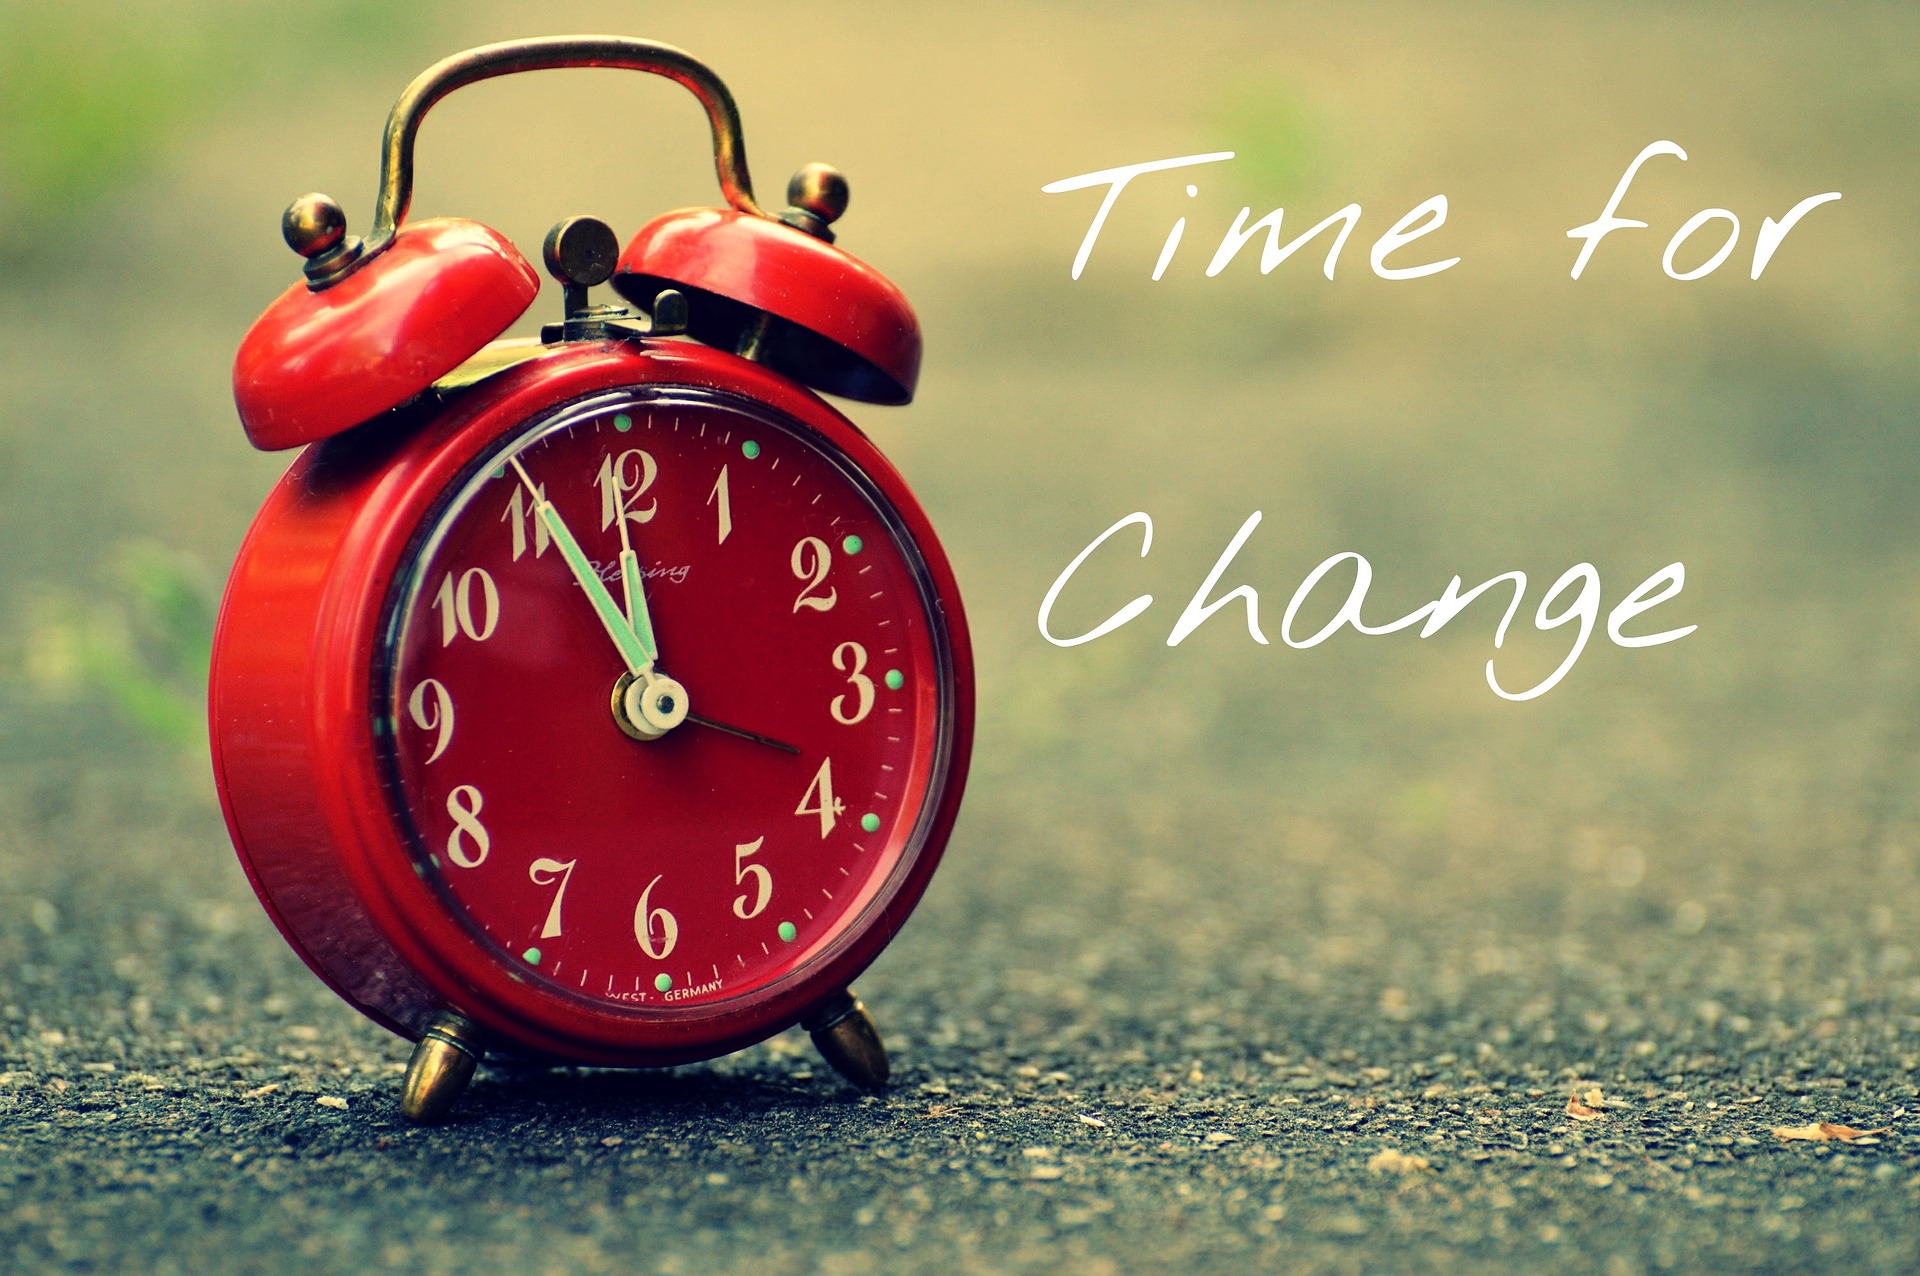 Red alarm clock: Time for change